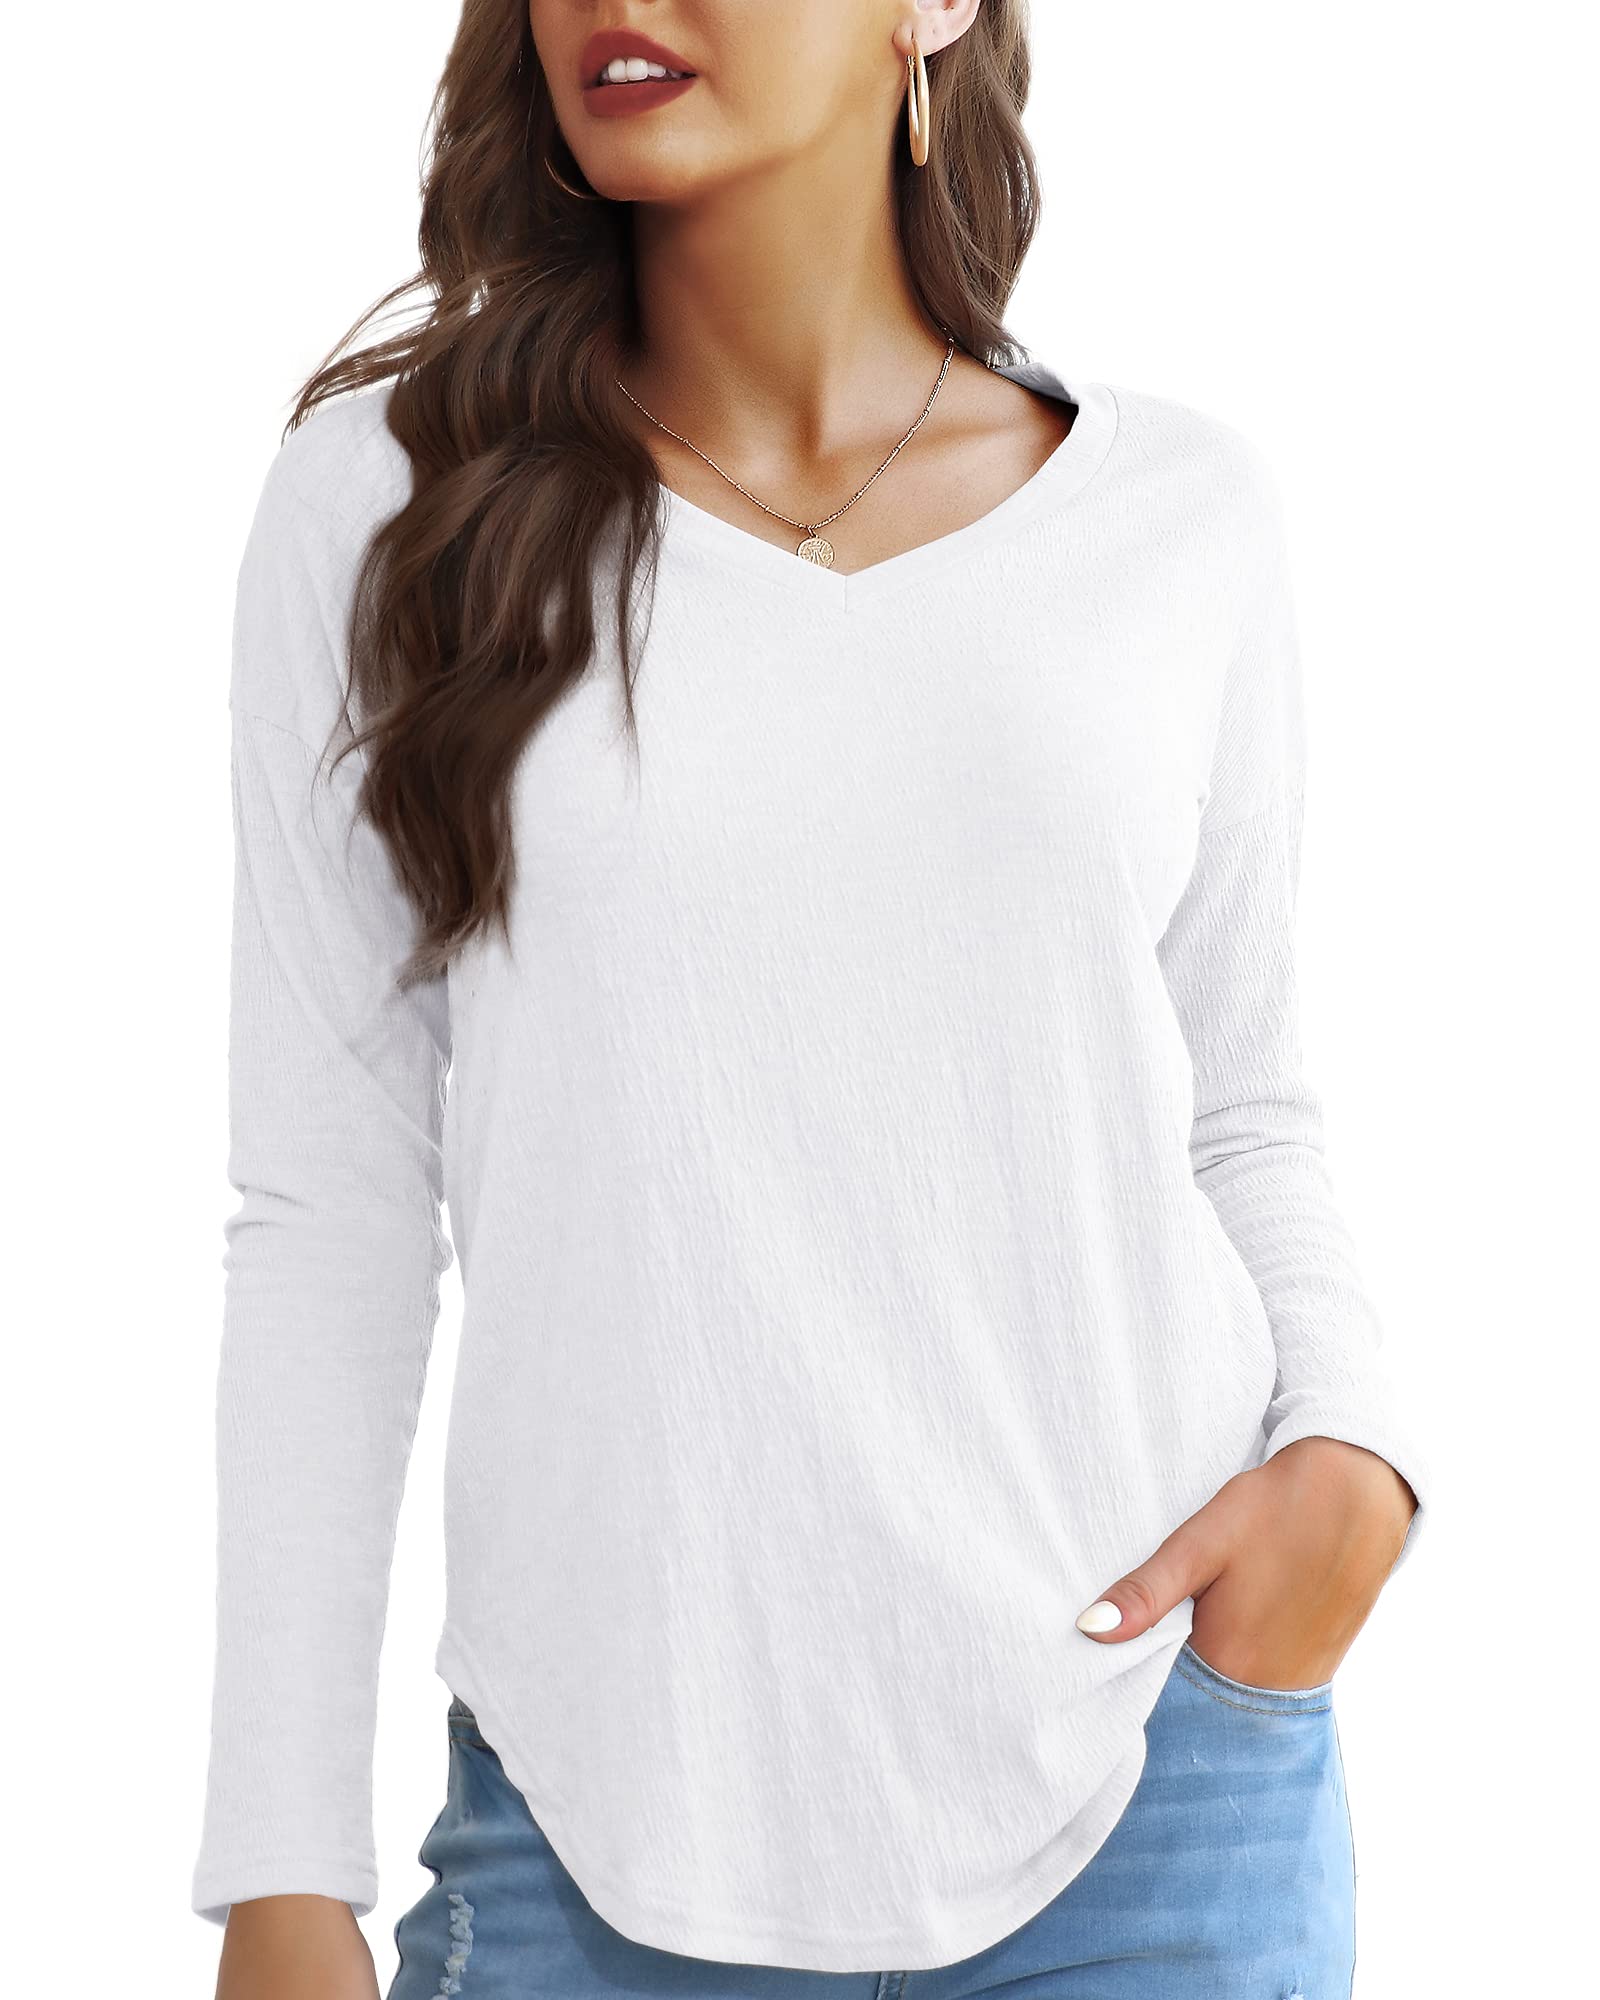 Koncle Womens Tops V Neck Long Sleeve Shirts for Women Casual Tunic Tops